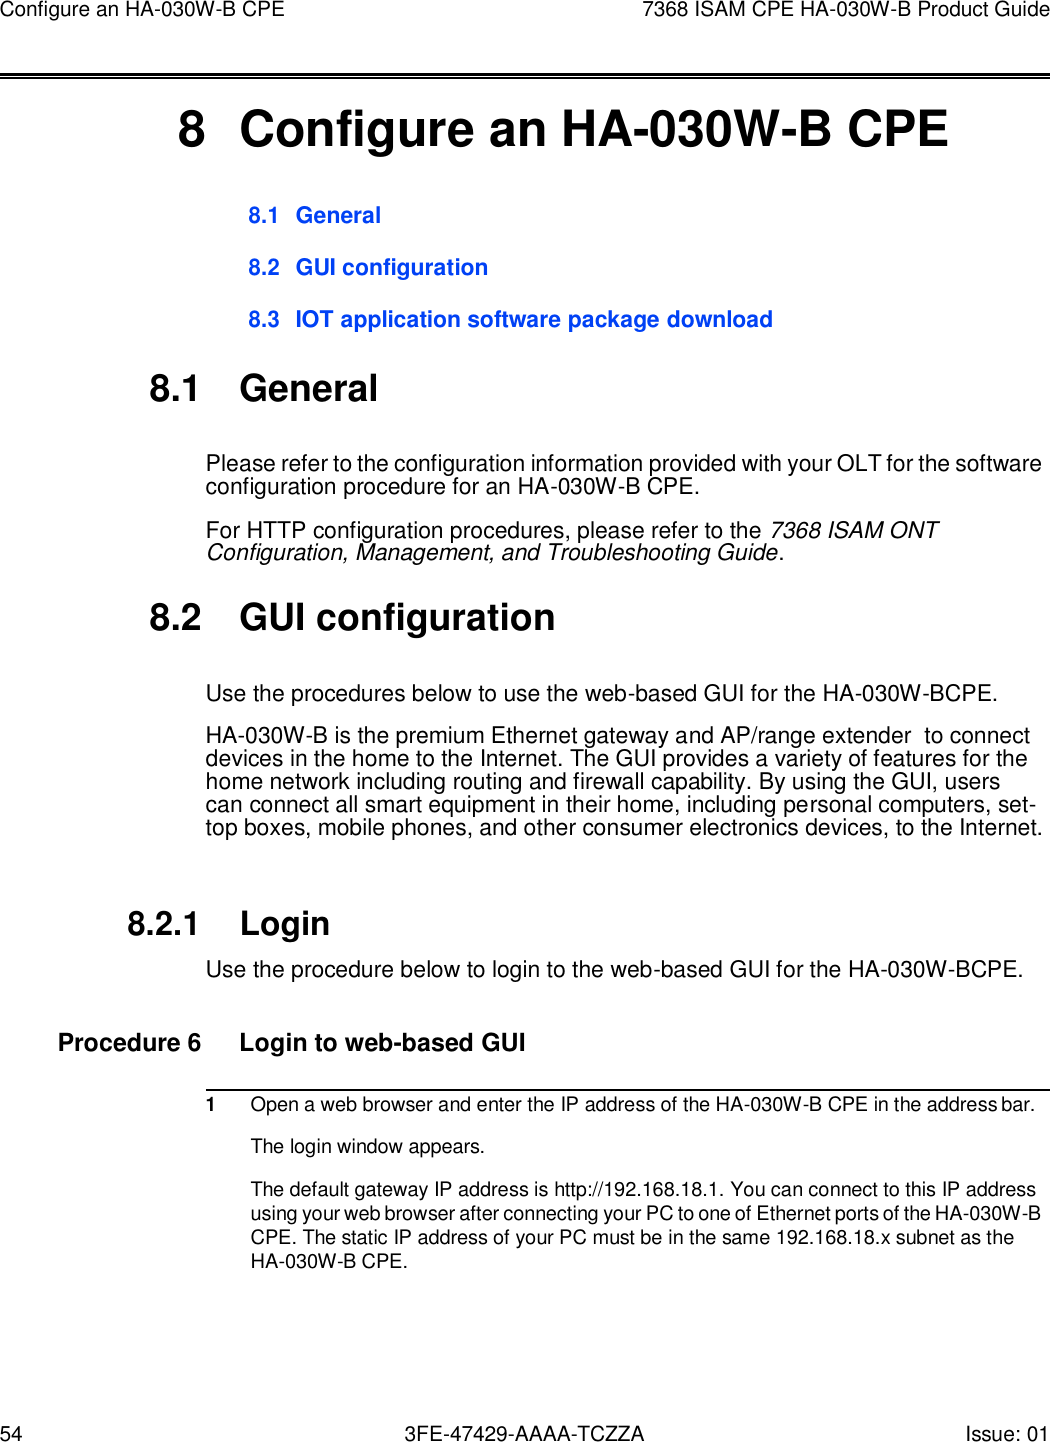 Page 54 of Nokia Bell HA030WB 7368 Intelligent Services Access Manager CPE User Manual 7368 ISAM CPE HA 020W A Product Guide